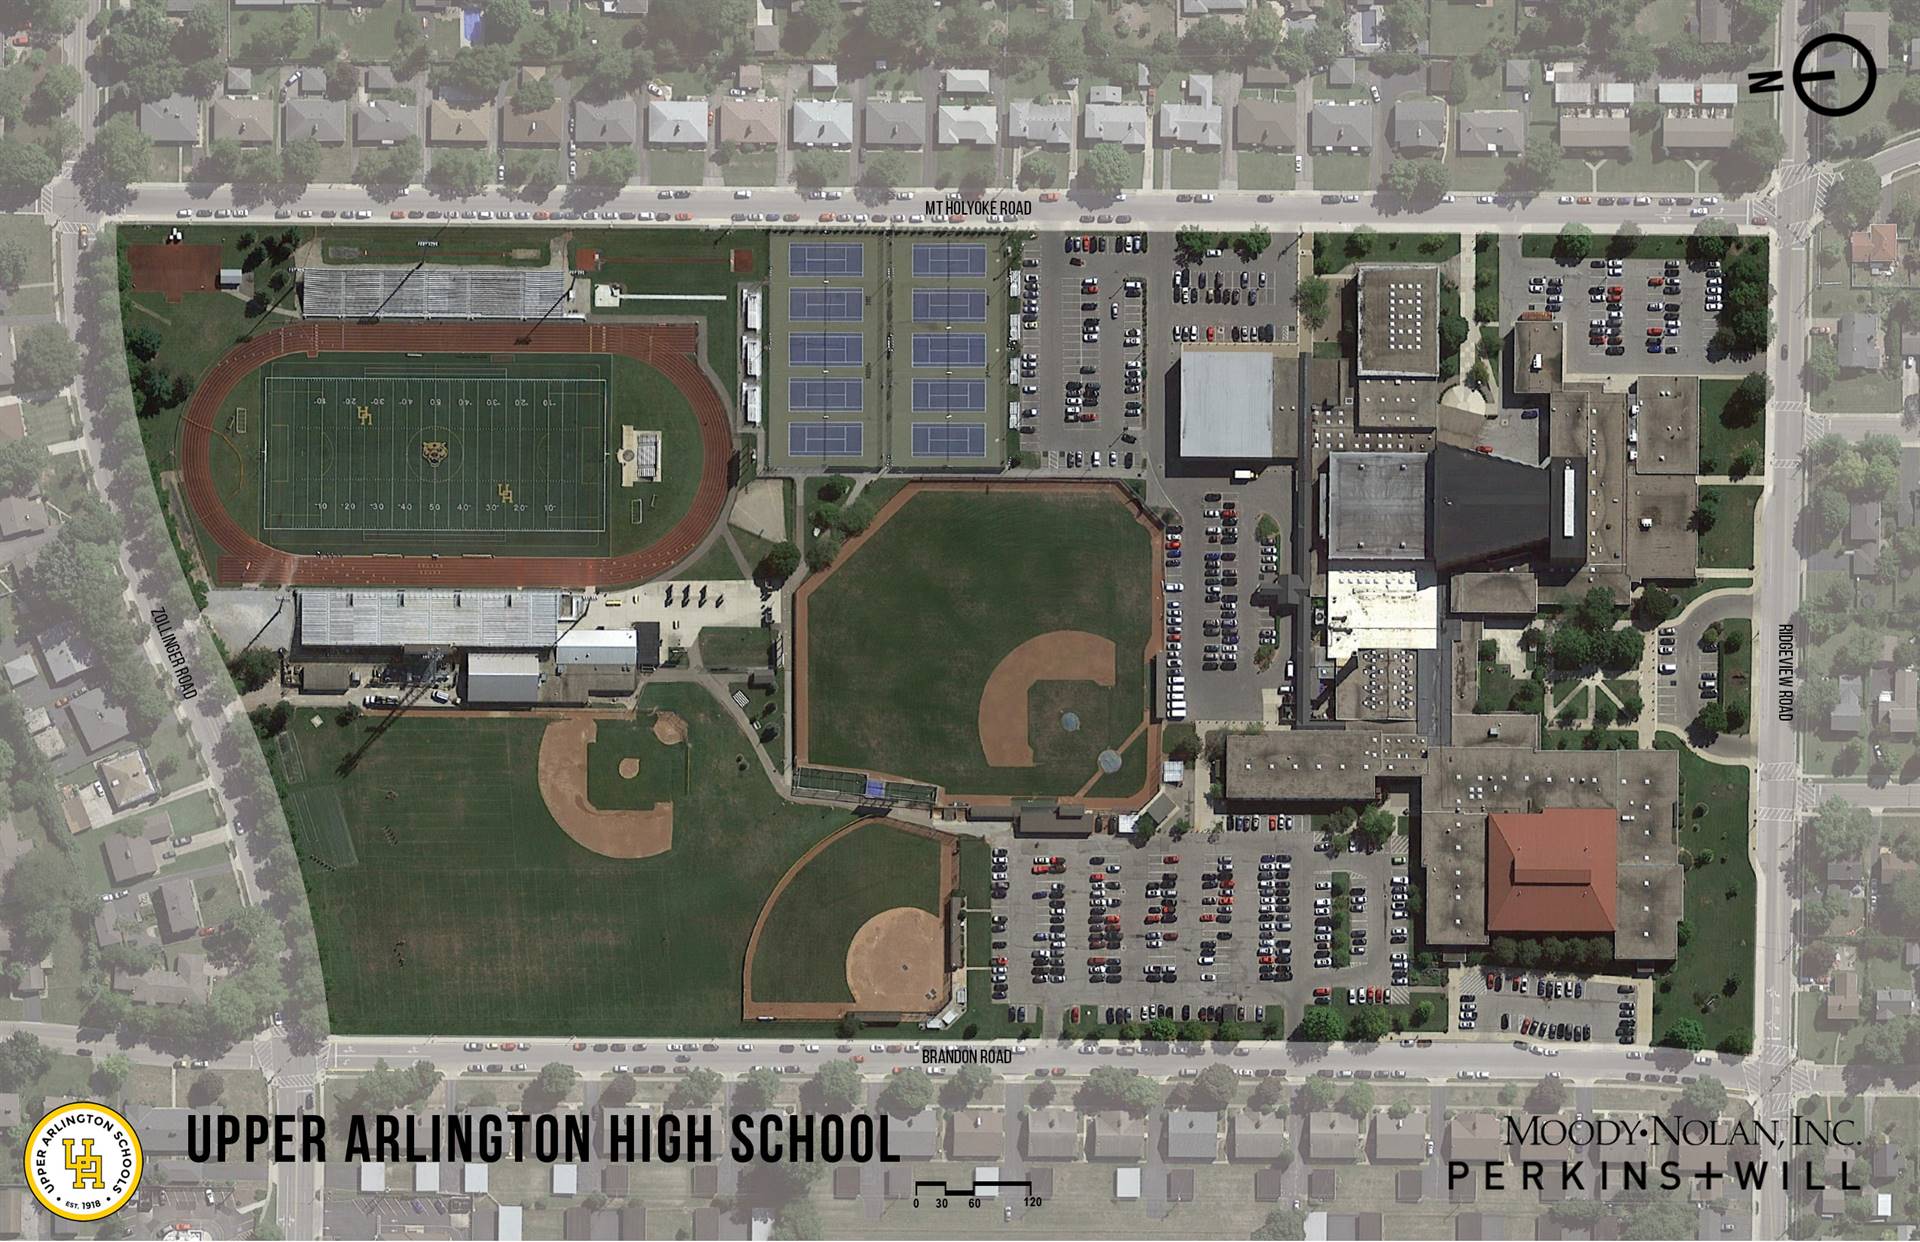 Current site plan for the high school